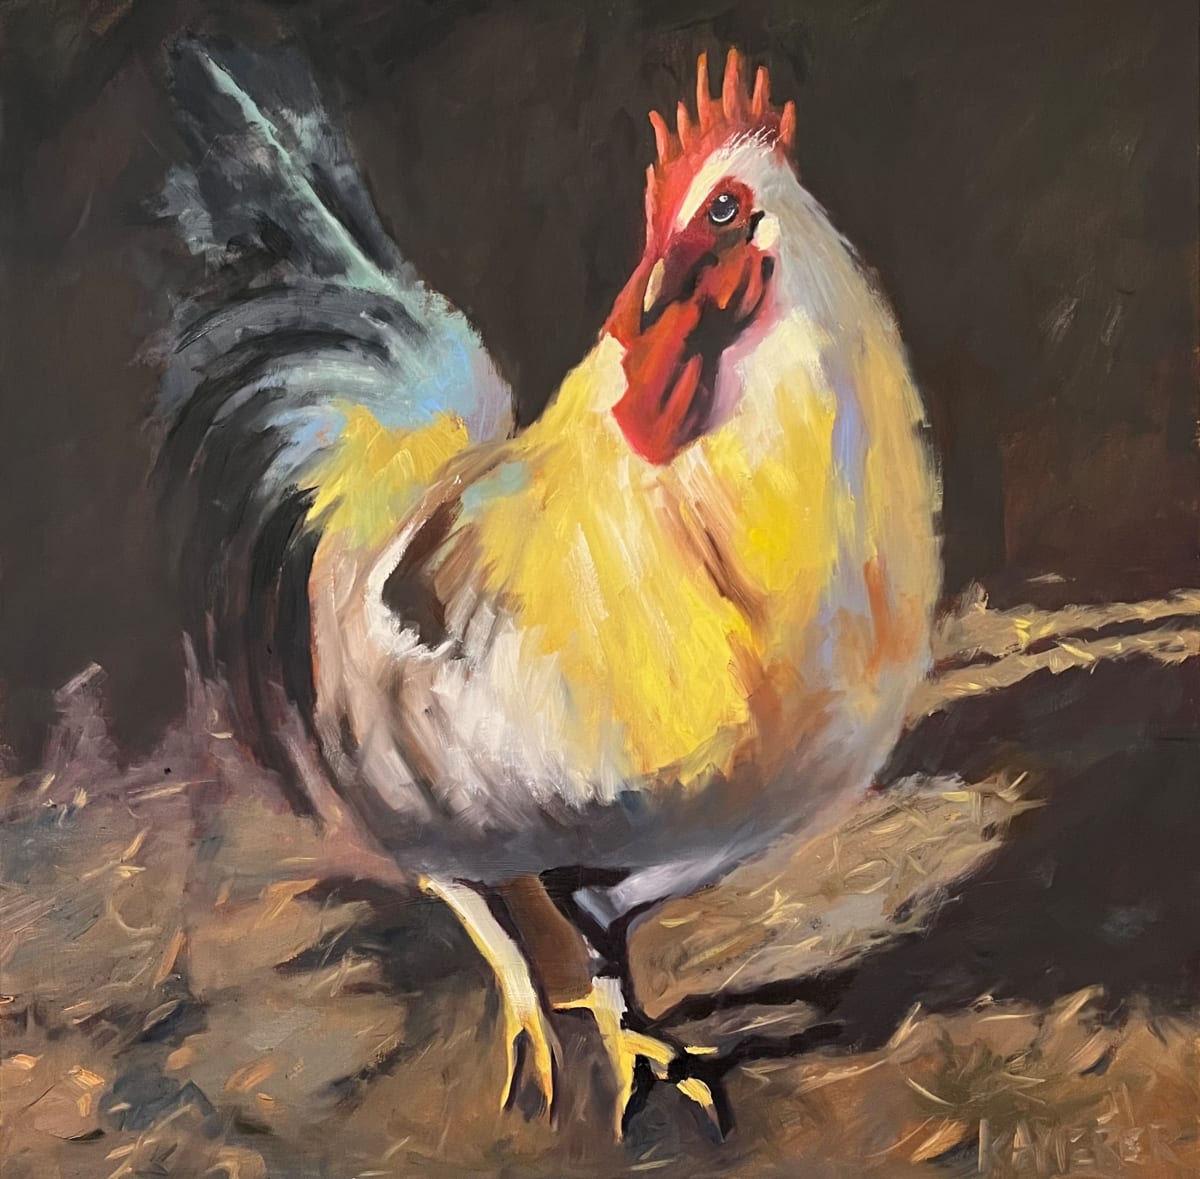 Struttin’ by Mary Kamerer Impressionist Painting  Image: This colorful fellow really pops on his dark background   Taking elements from traditional chiaroscuro, I really wanted to emphasize the light and shadows in this painting.  He’s got a modern twist in color and style. Perfect for that office or kitchen. Framed in a natural wood floating frame.   I guess you could say he’s a lot to crow about